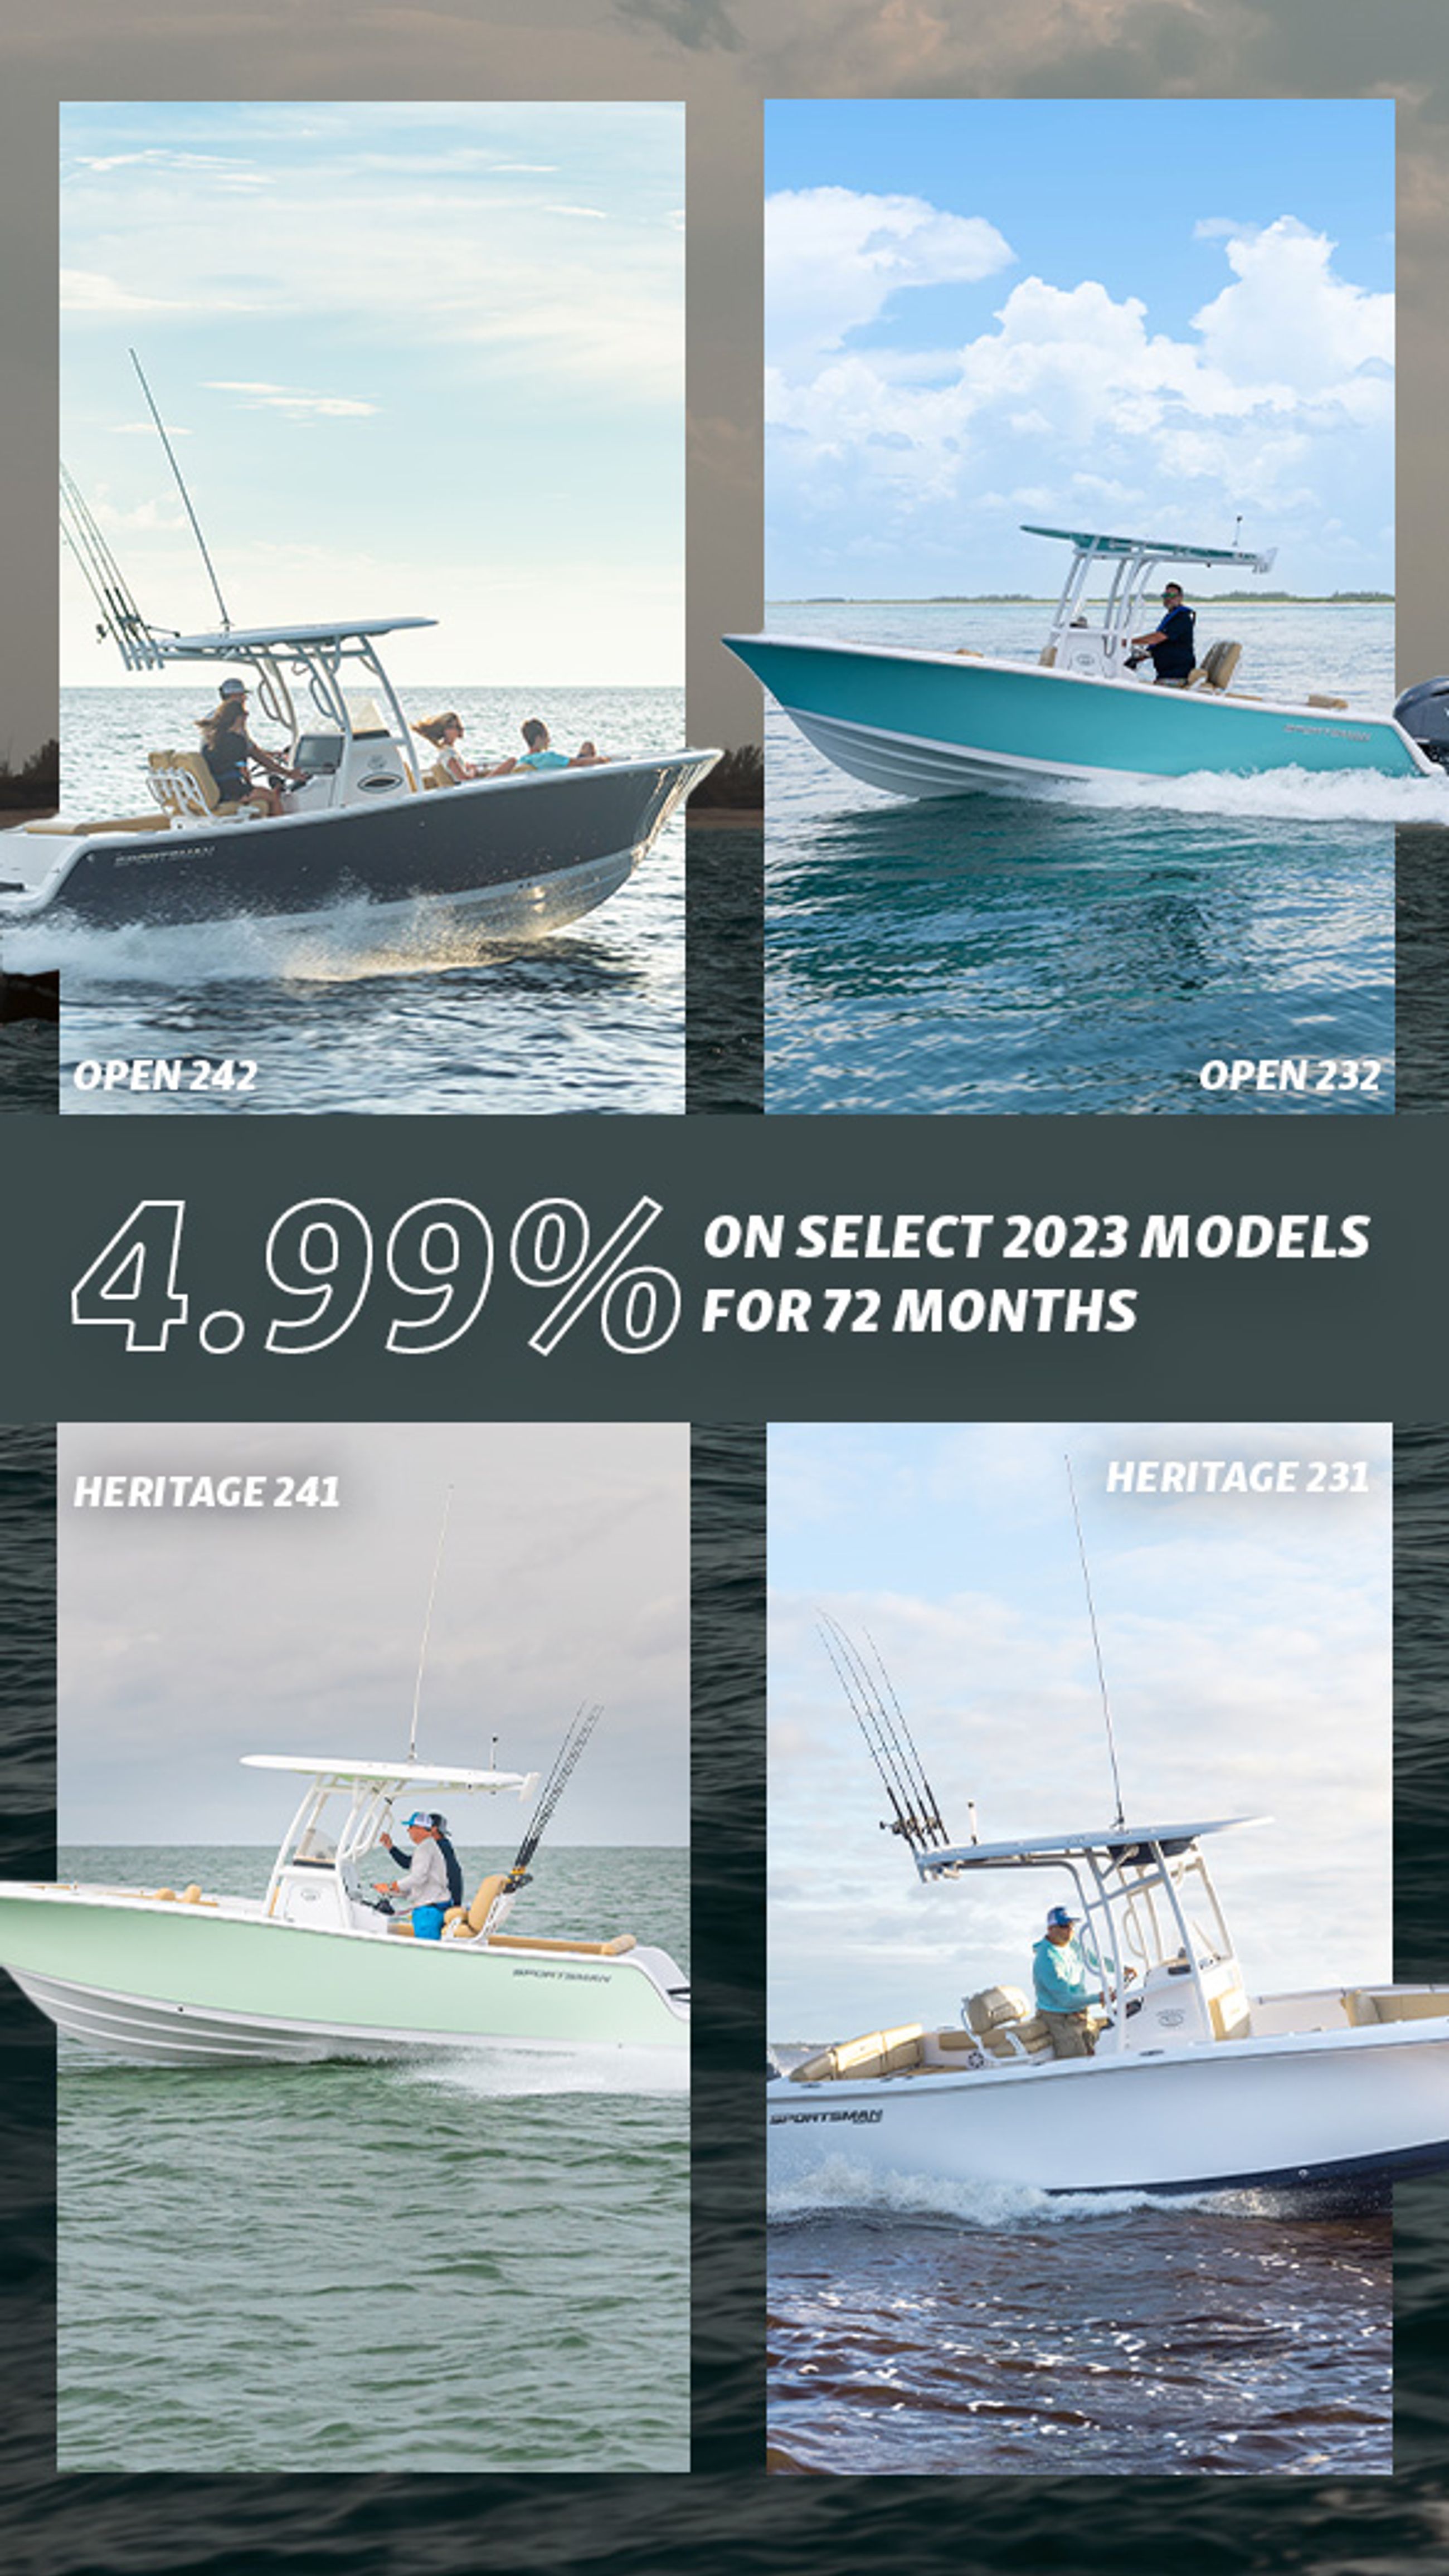 4.99% on select 2023 models.